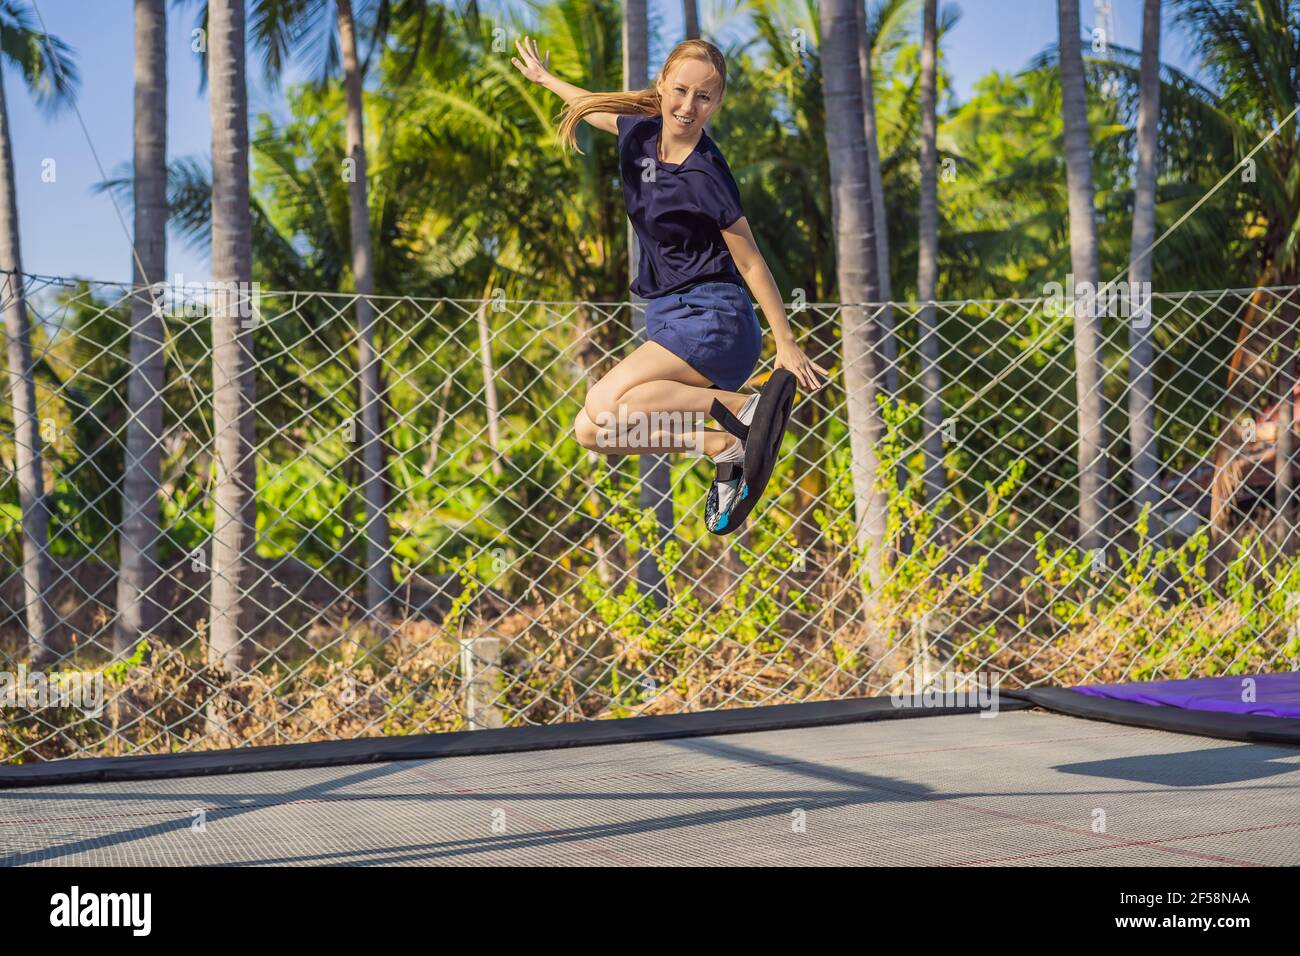 Young woman on a soft board for a trampoline jumping on an outdoor trampoline, against the backdrop of palm trees. The trampoline board is like a Stock Photo